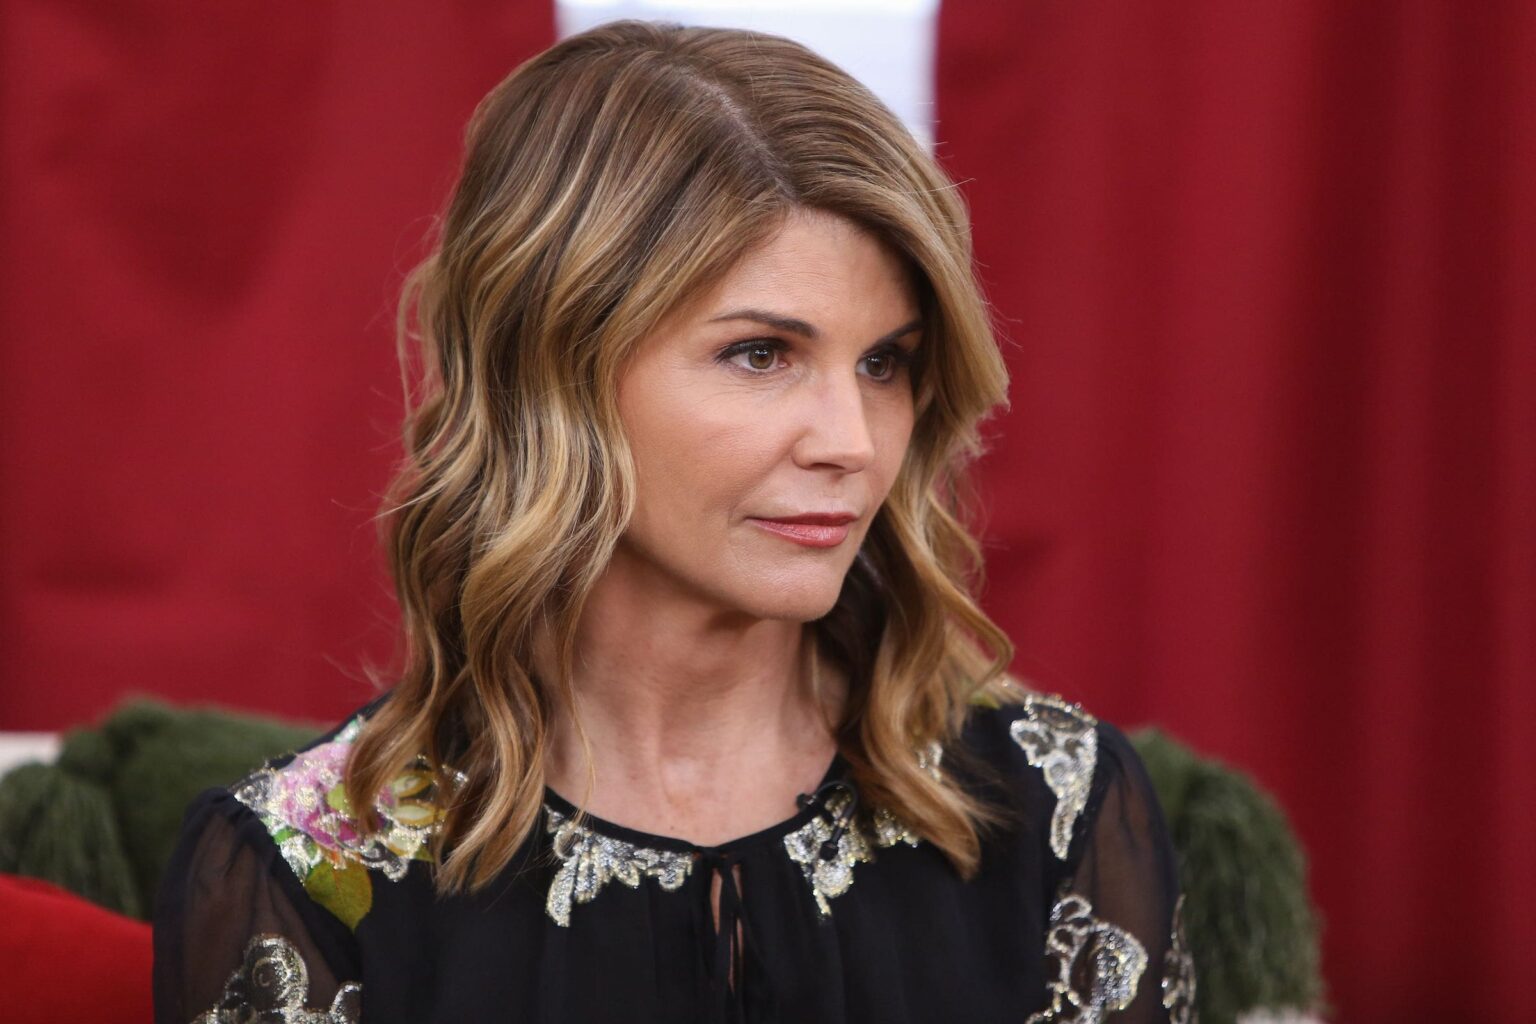 After her college admission scandal, Lori Loughlin has returned to acting. See how people have reacted to her TV return after committing bribery & fraud.